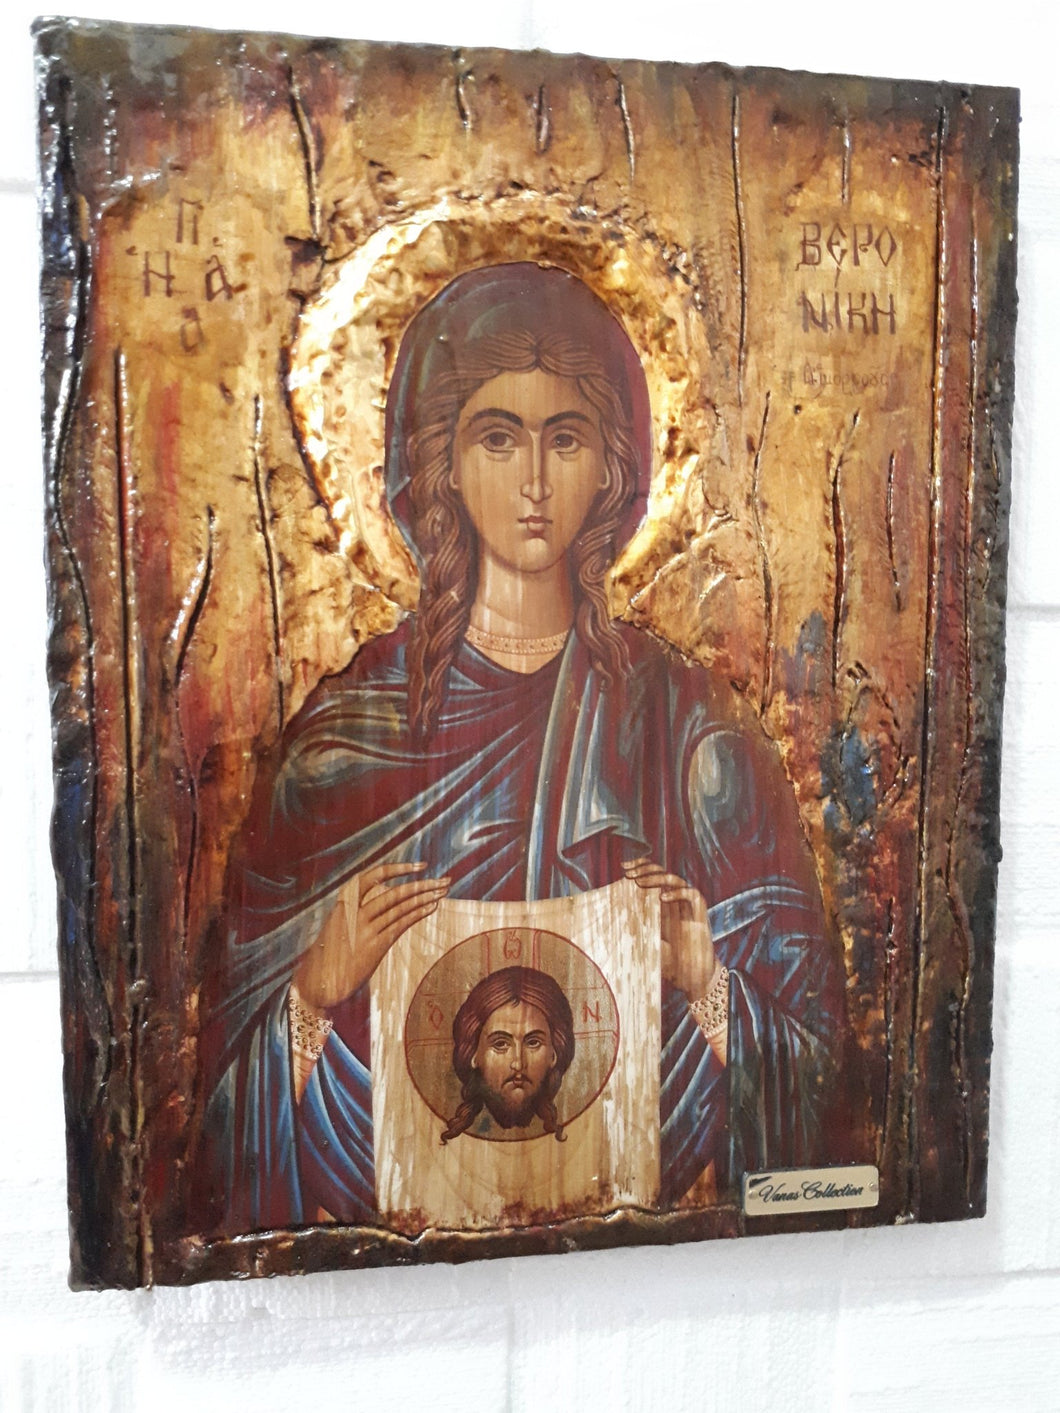 Saint Veronica Issue of blood- Rare Byzantine Greek Orthodox Antique Style Icons - Vanas Collection